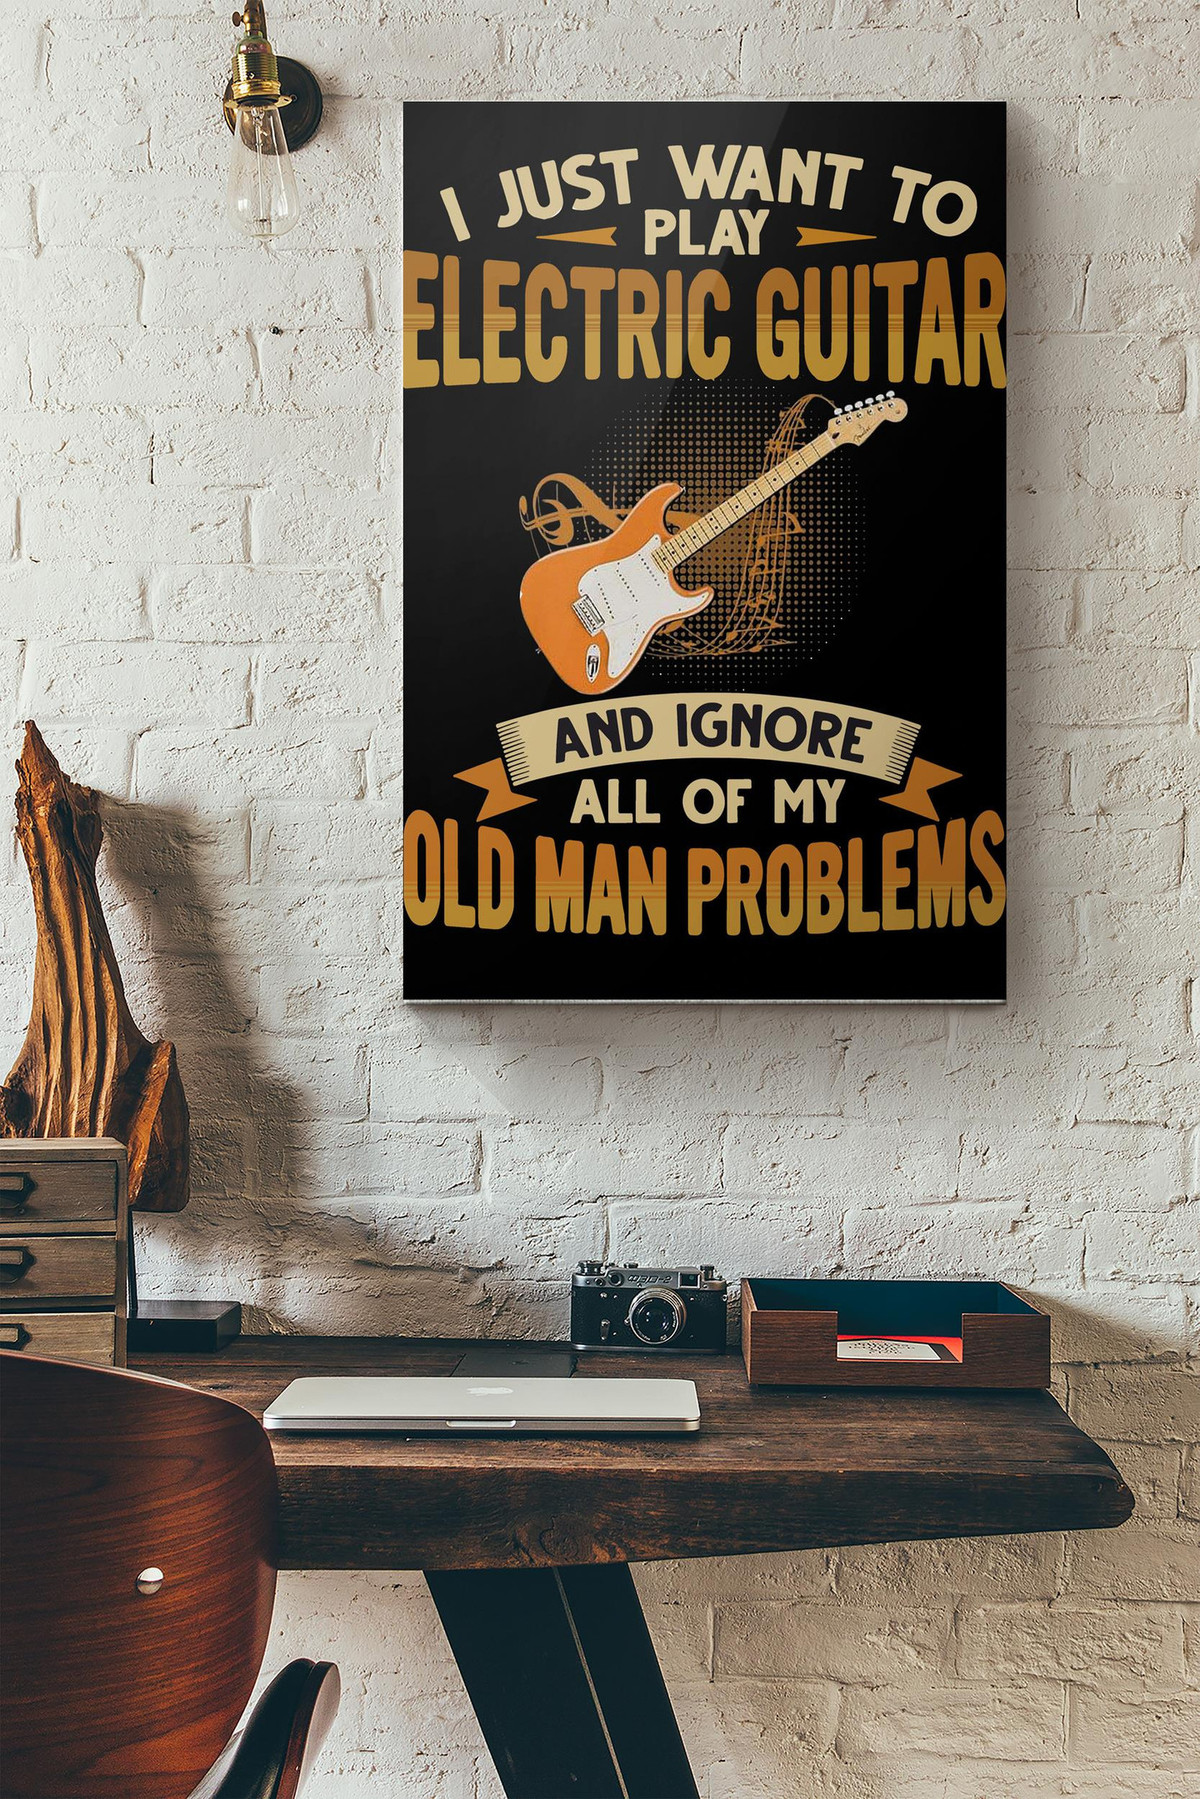 I Just Want To Play Electric Guitar And Ignore All Of My Old Man Problems Canvas Painting Ideas, Canvas Hanging Prints, Gift Idea Framed Prints, Canvas Paintings Wrapped Canvas 8x10